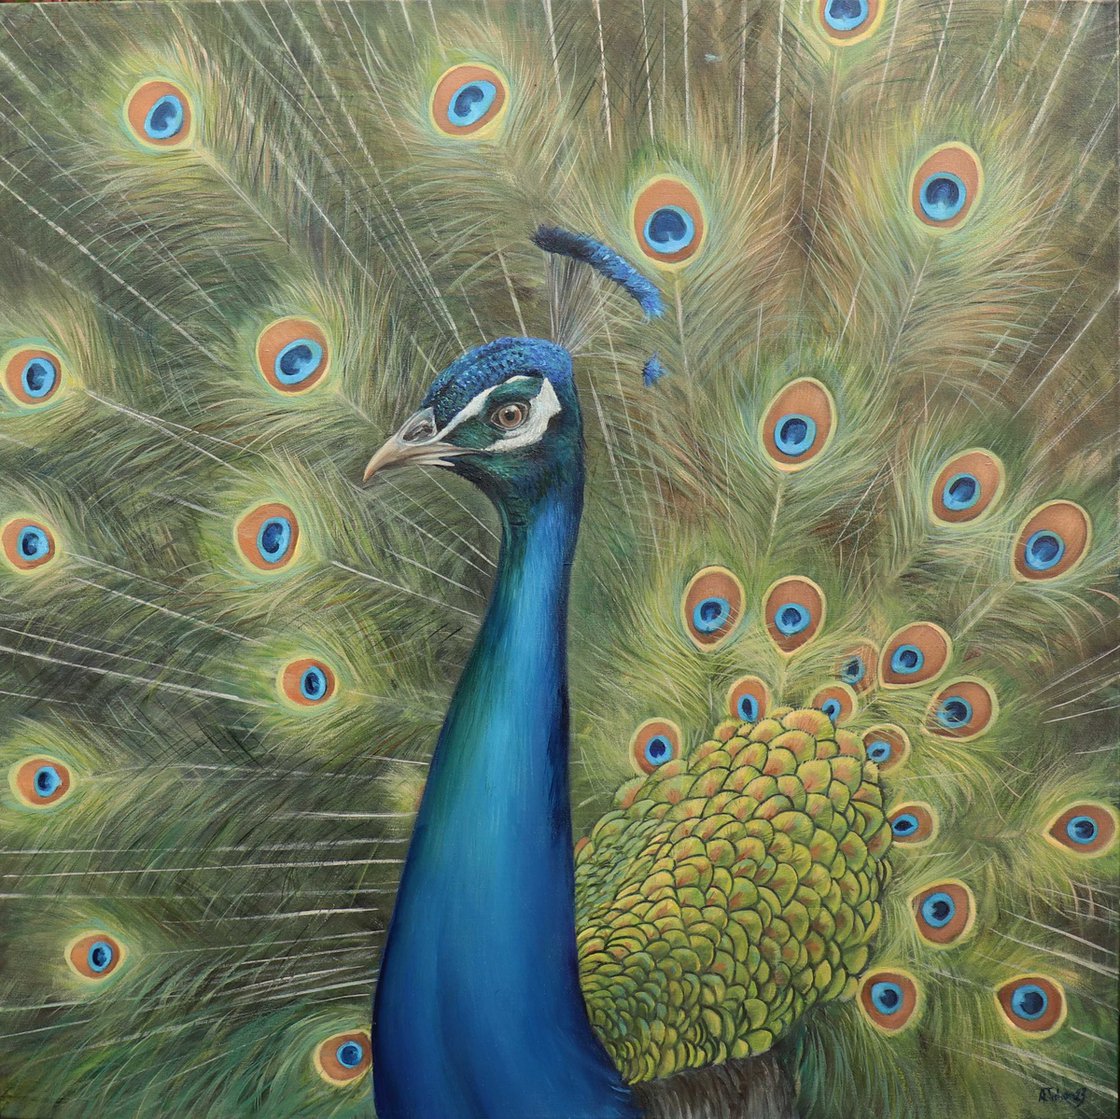 Peacock of a Thousand Eyes Oil painting by Alex Jabore | Artfinder